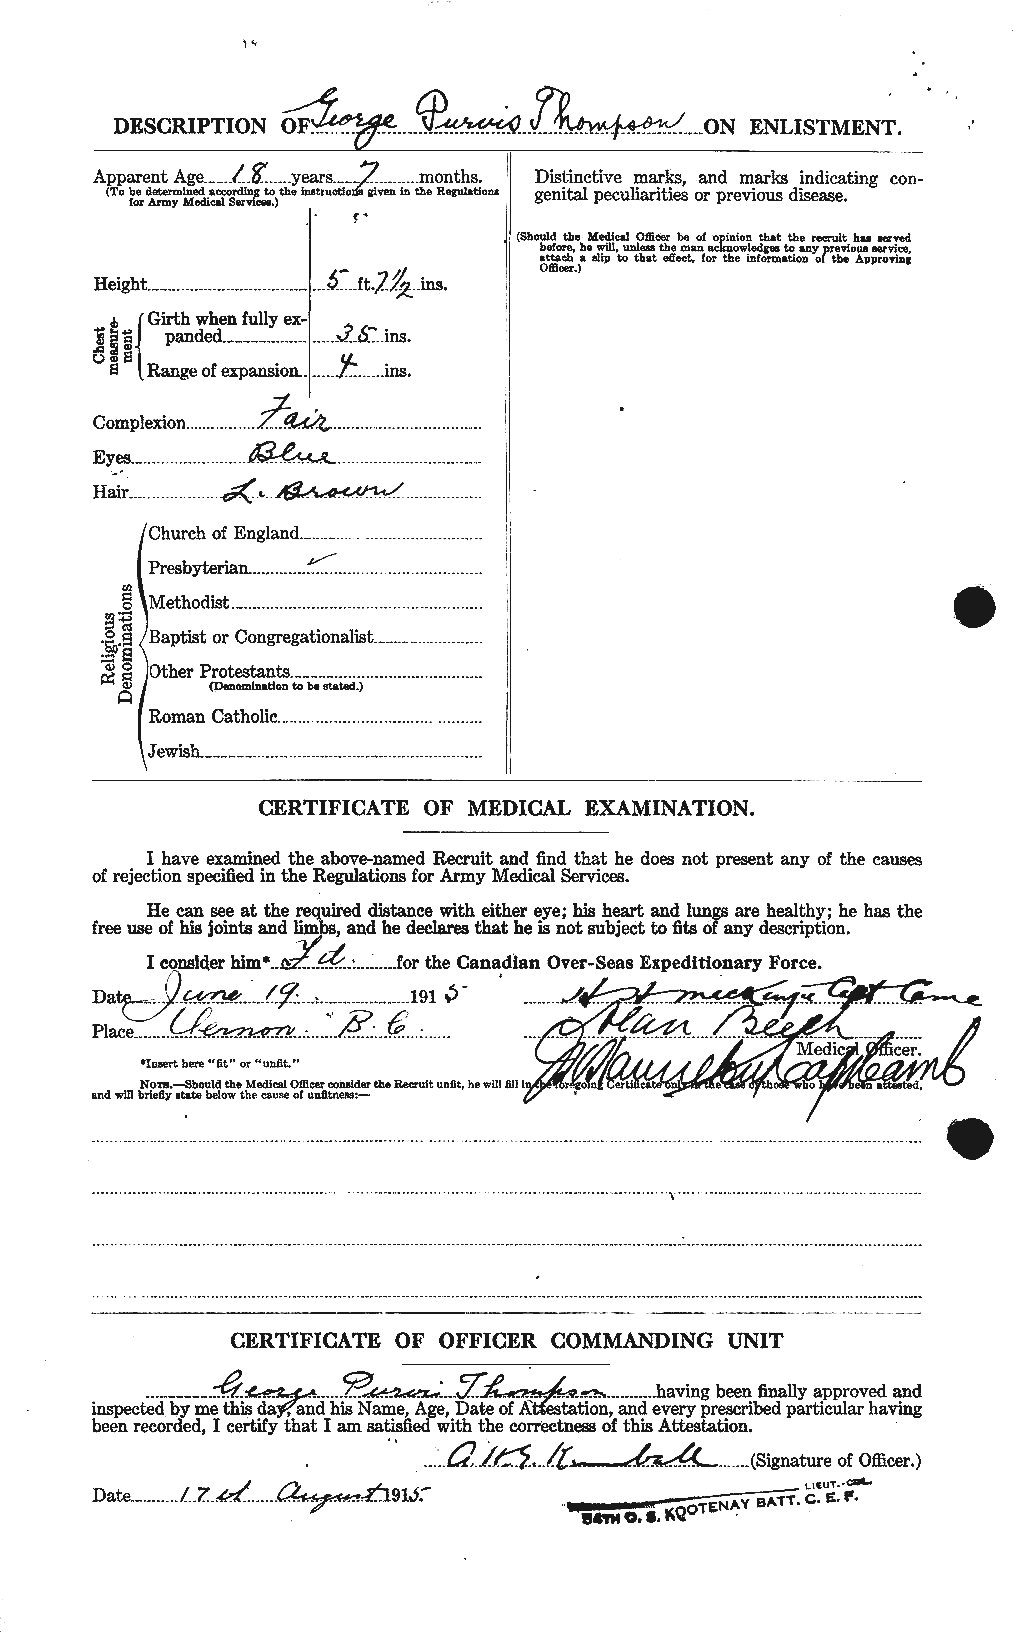 Personnel Records of the First World War - CEF 633122b